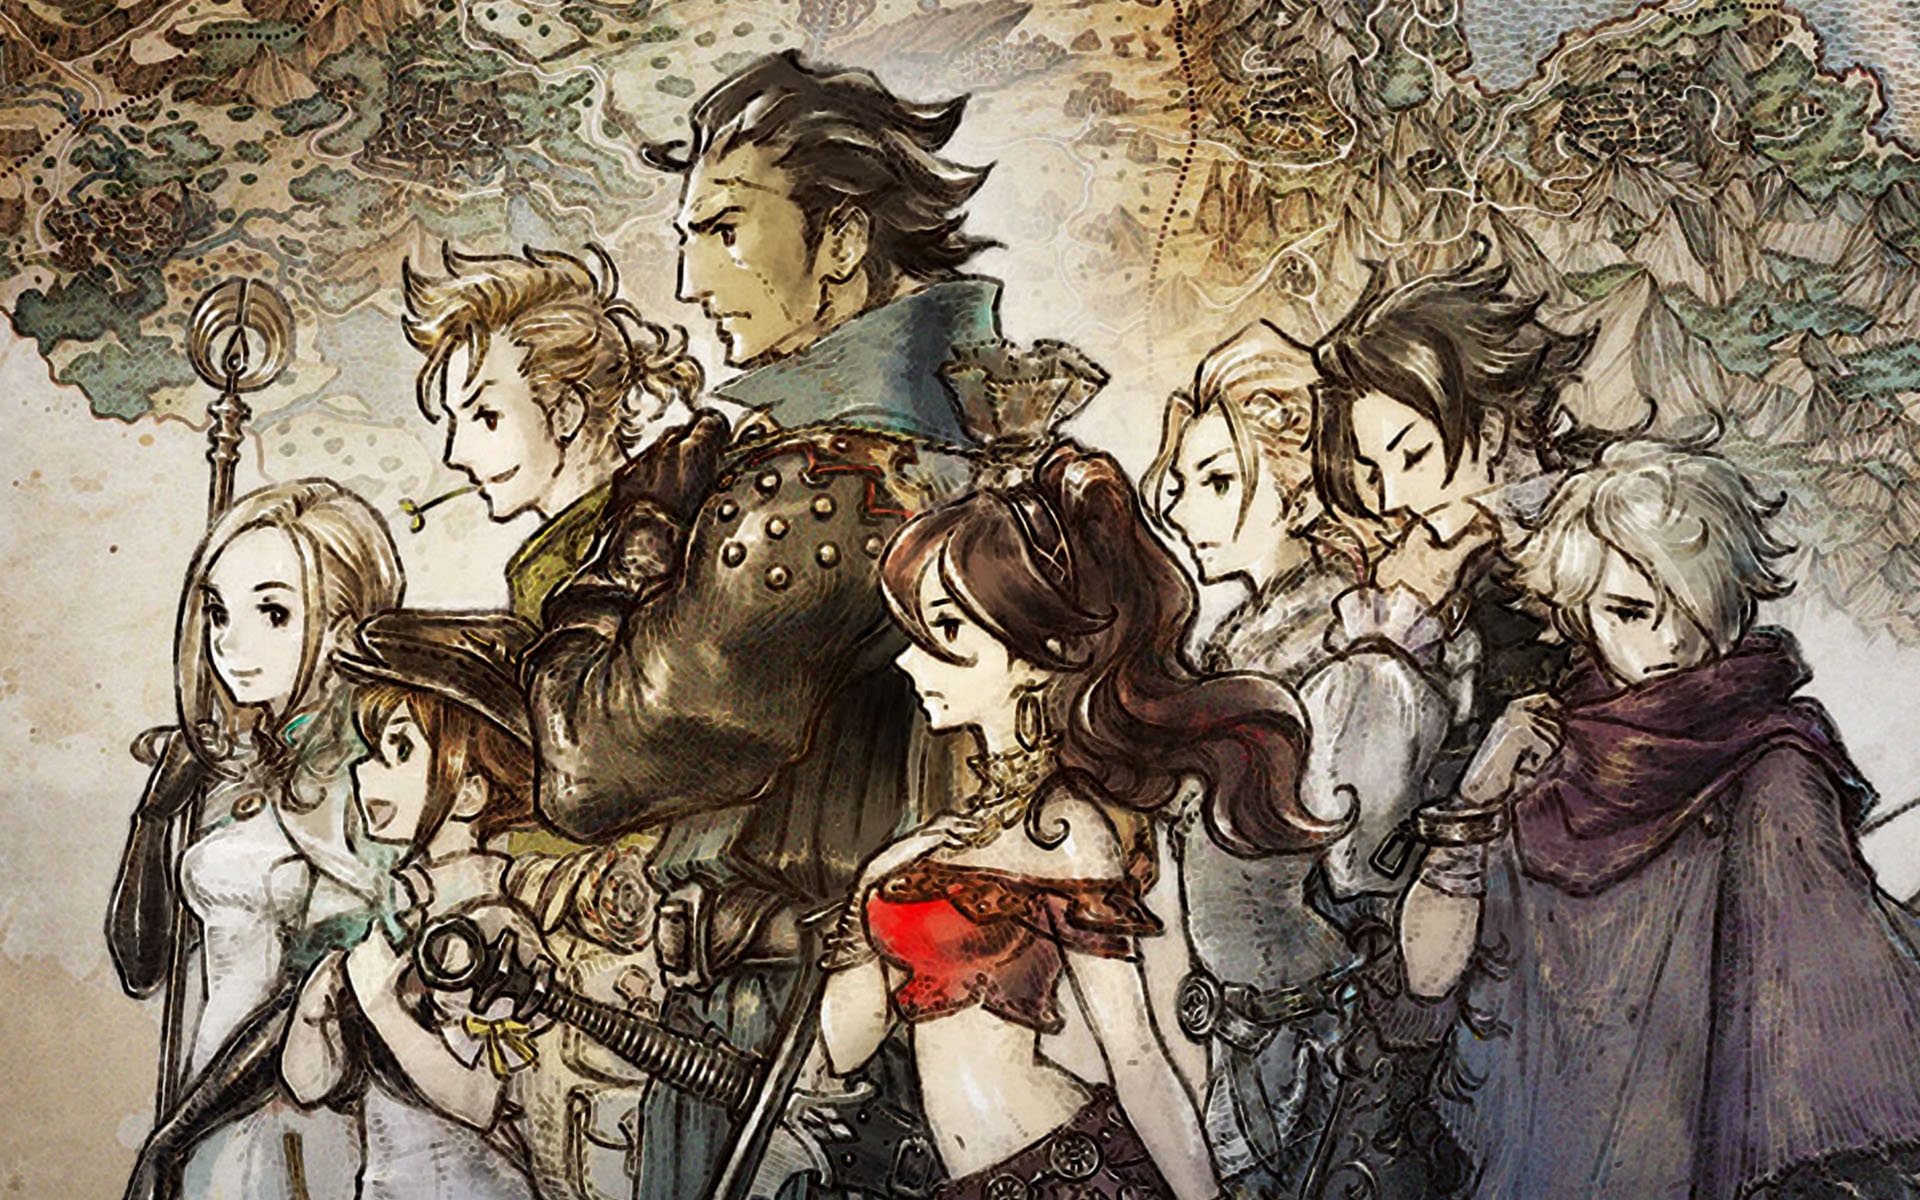 download free octopath traveler cotc